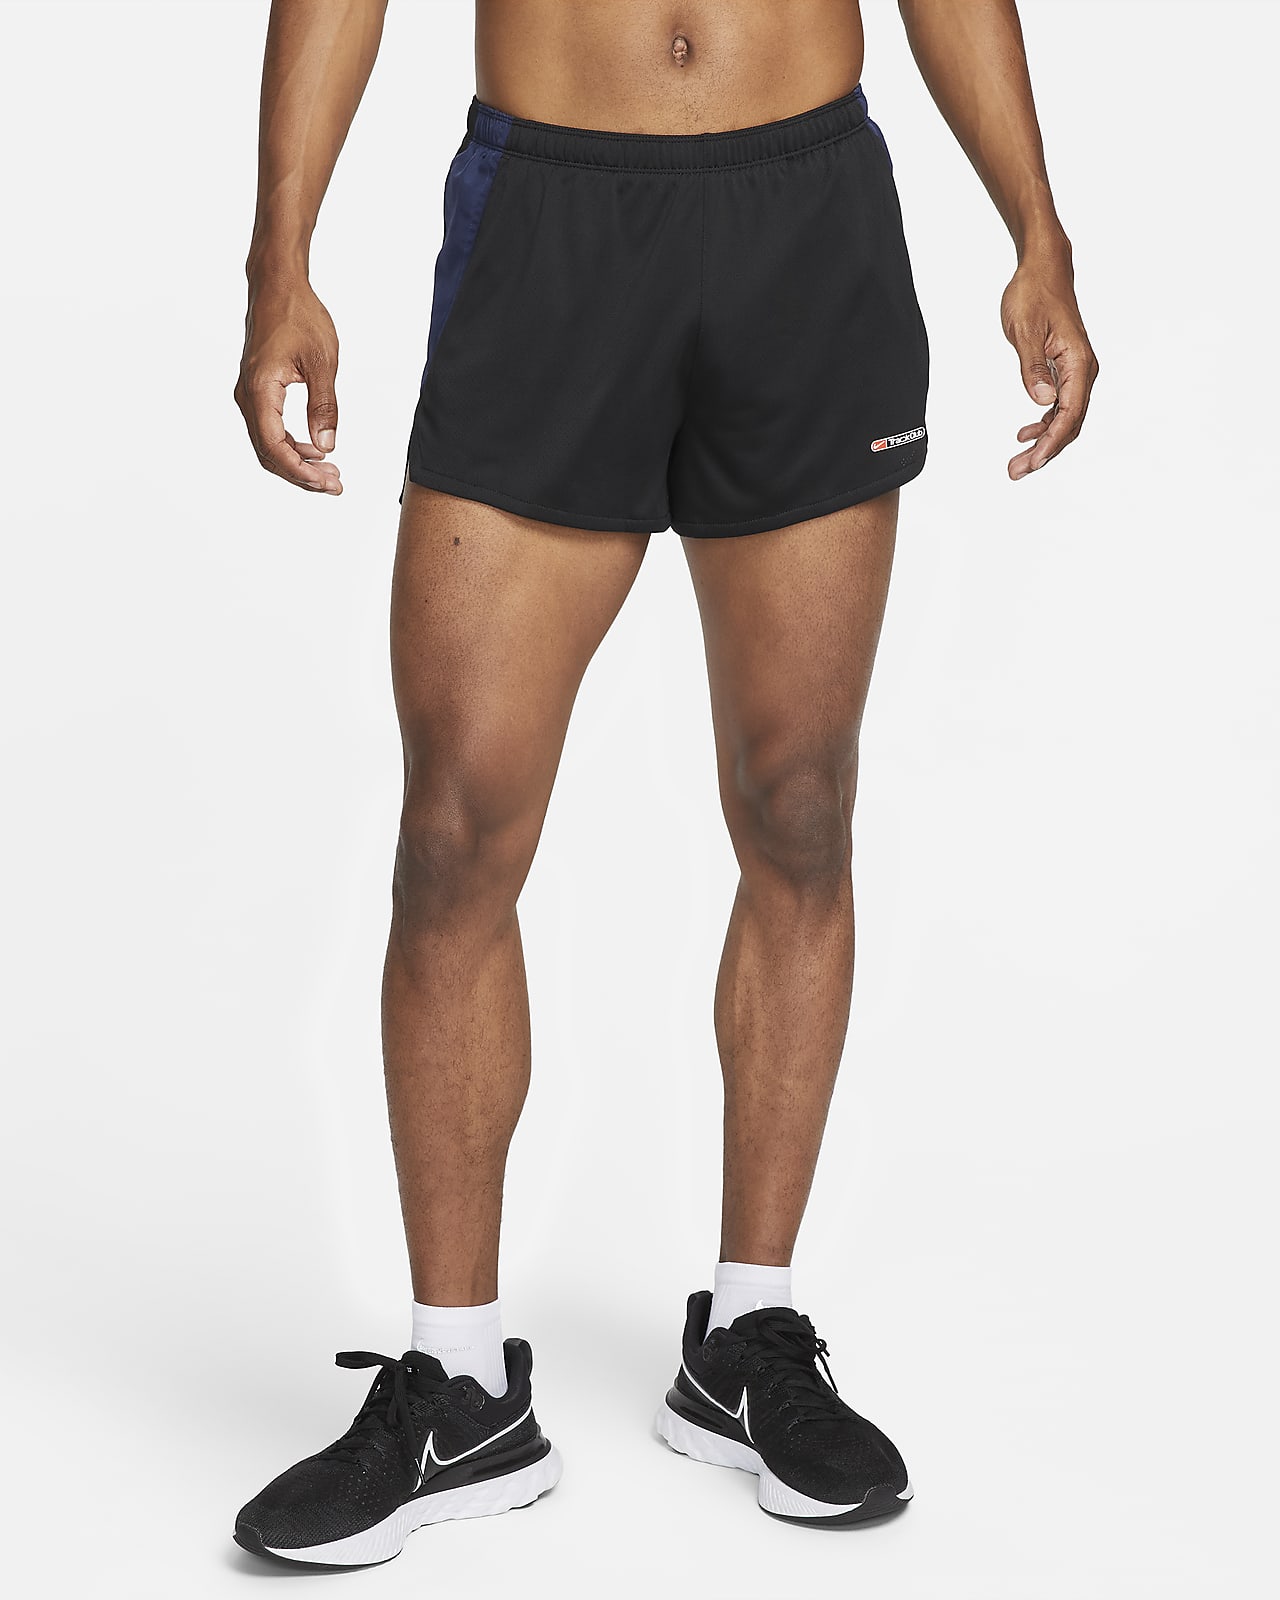 Men's 7 Lined Run Shorts - All in Motion Black L